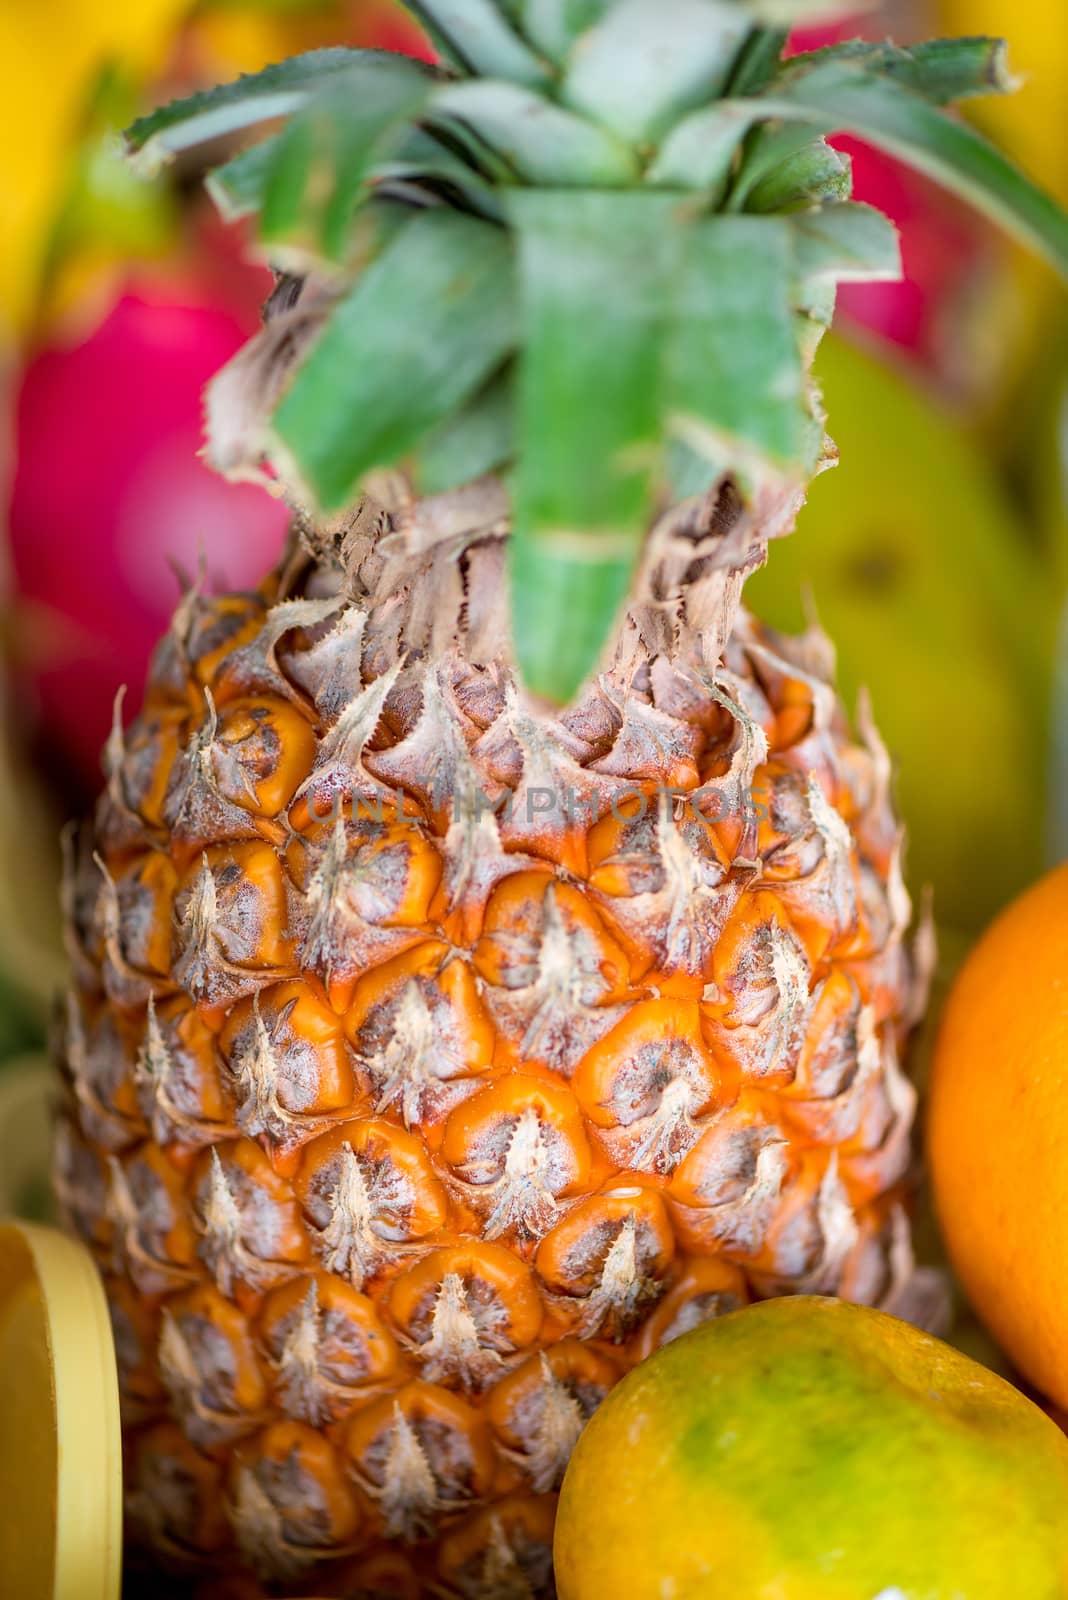 Natural ripe pineapple close-up vertical photo by kosmsos111